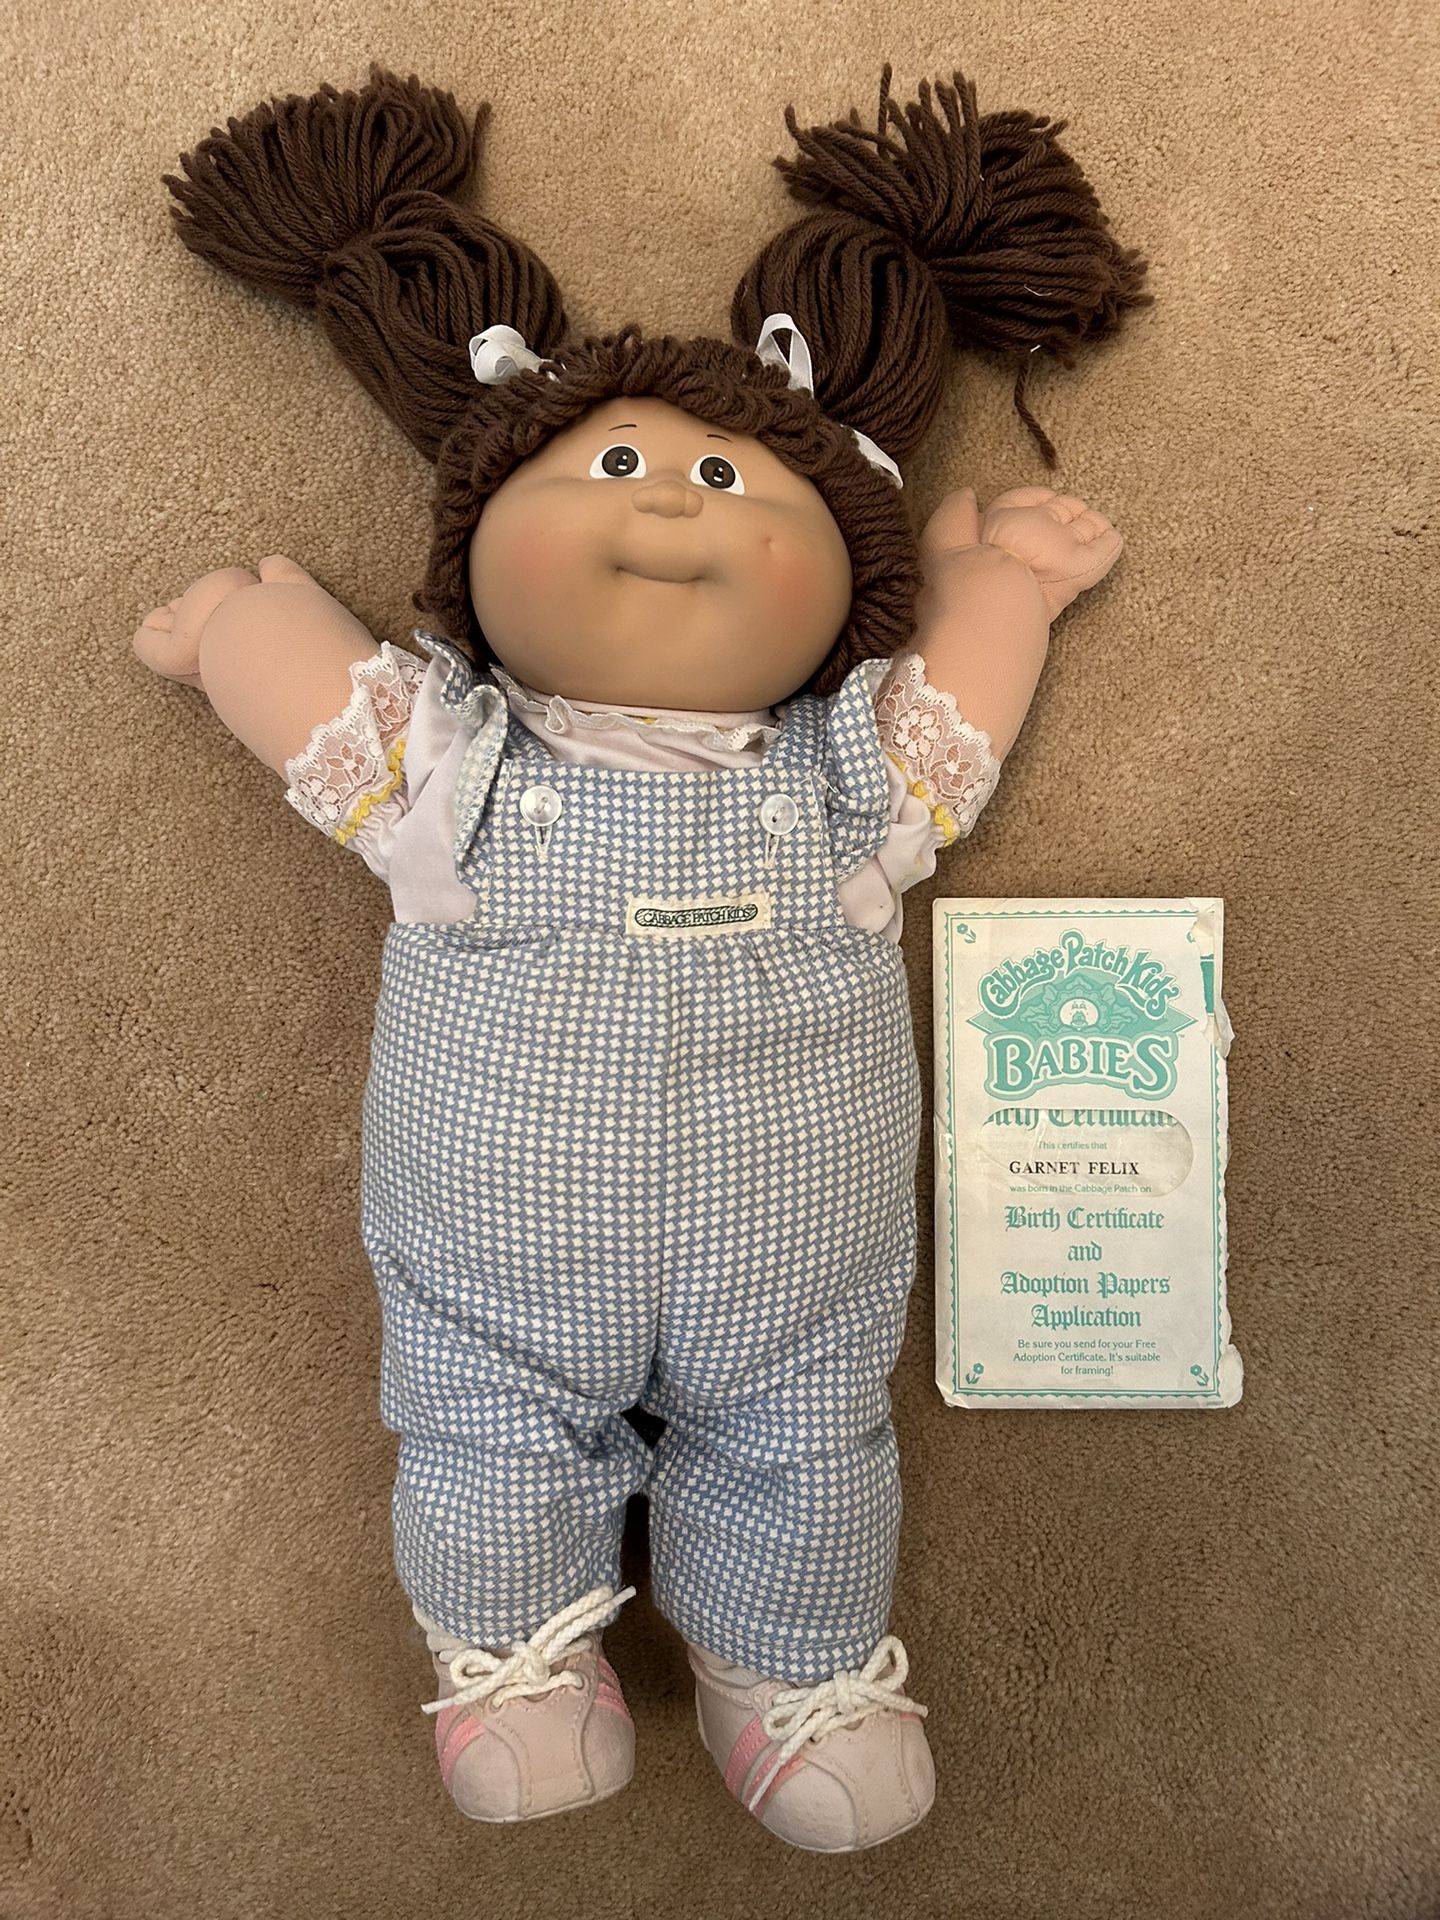 Cabbage Patch Dolls with Birth Certificates and Adoption Papers 